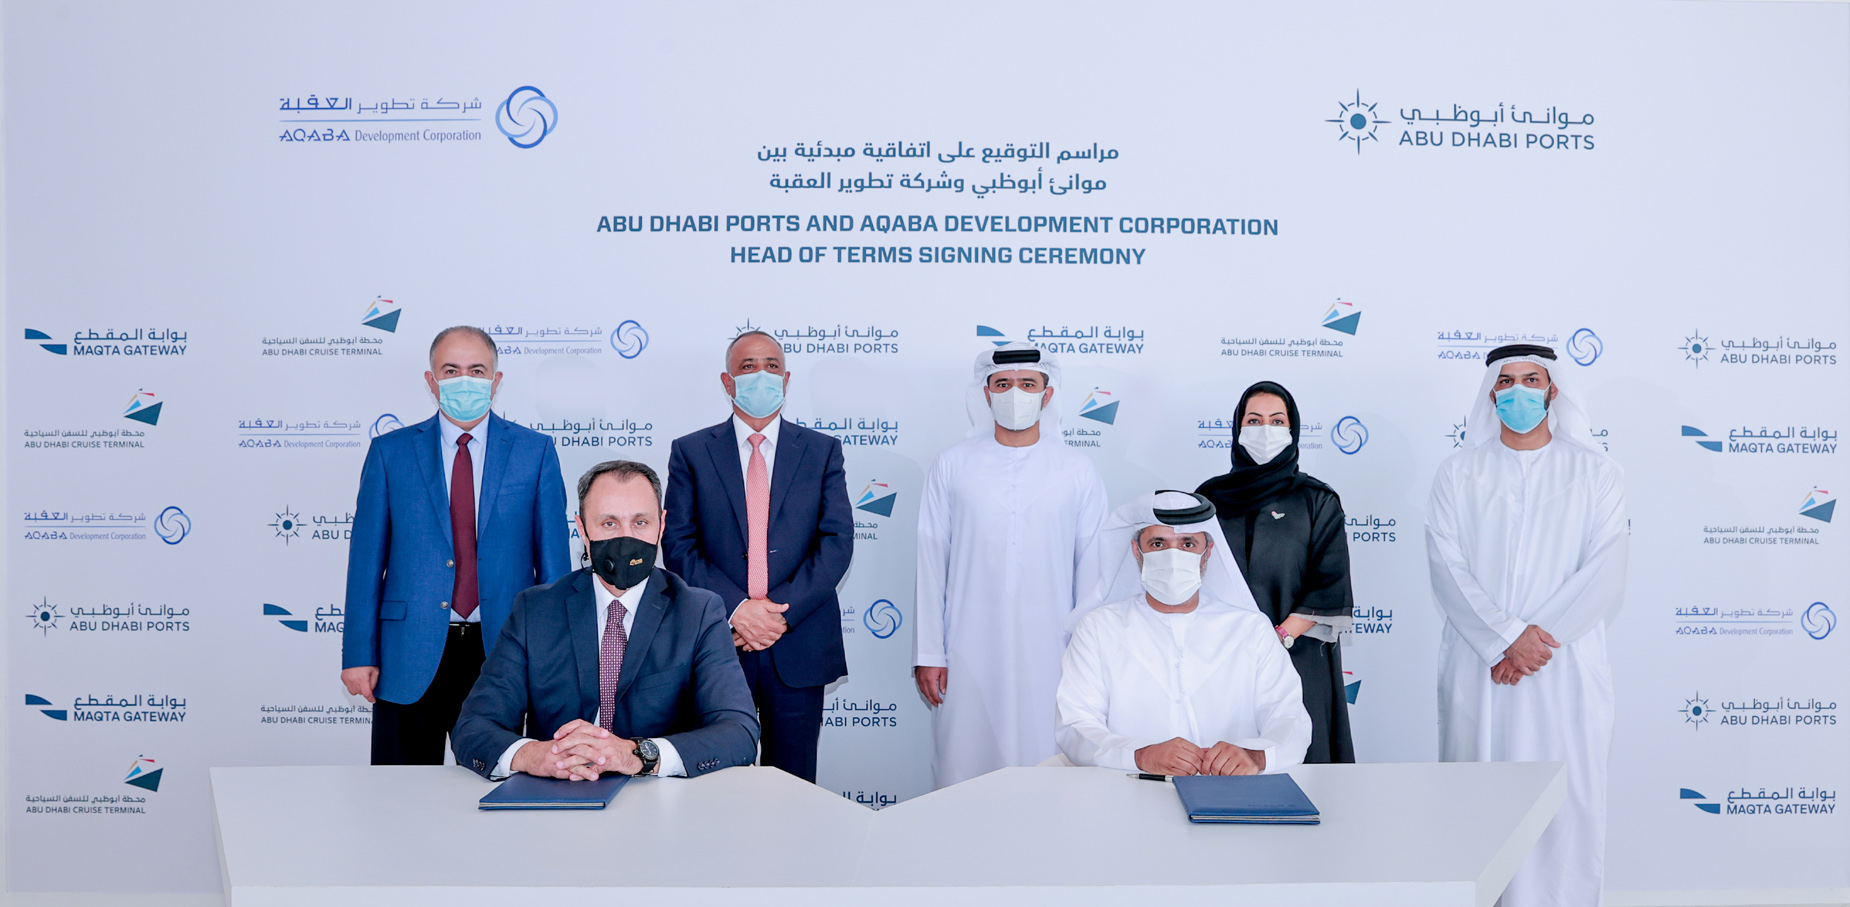 AD Ports Group And Aqaba Development Corporation Sign Agreement For Tourism And Maritime Enhancement Projects In Aqaba – Jordan